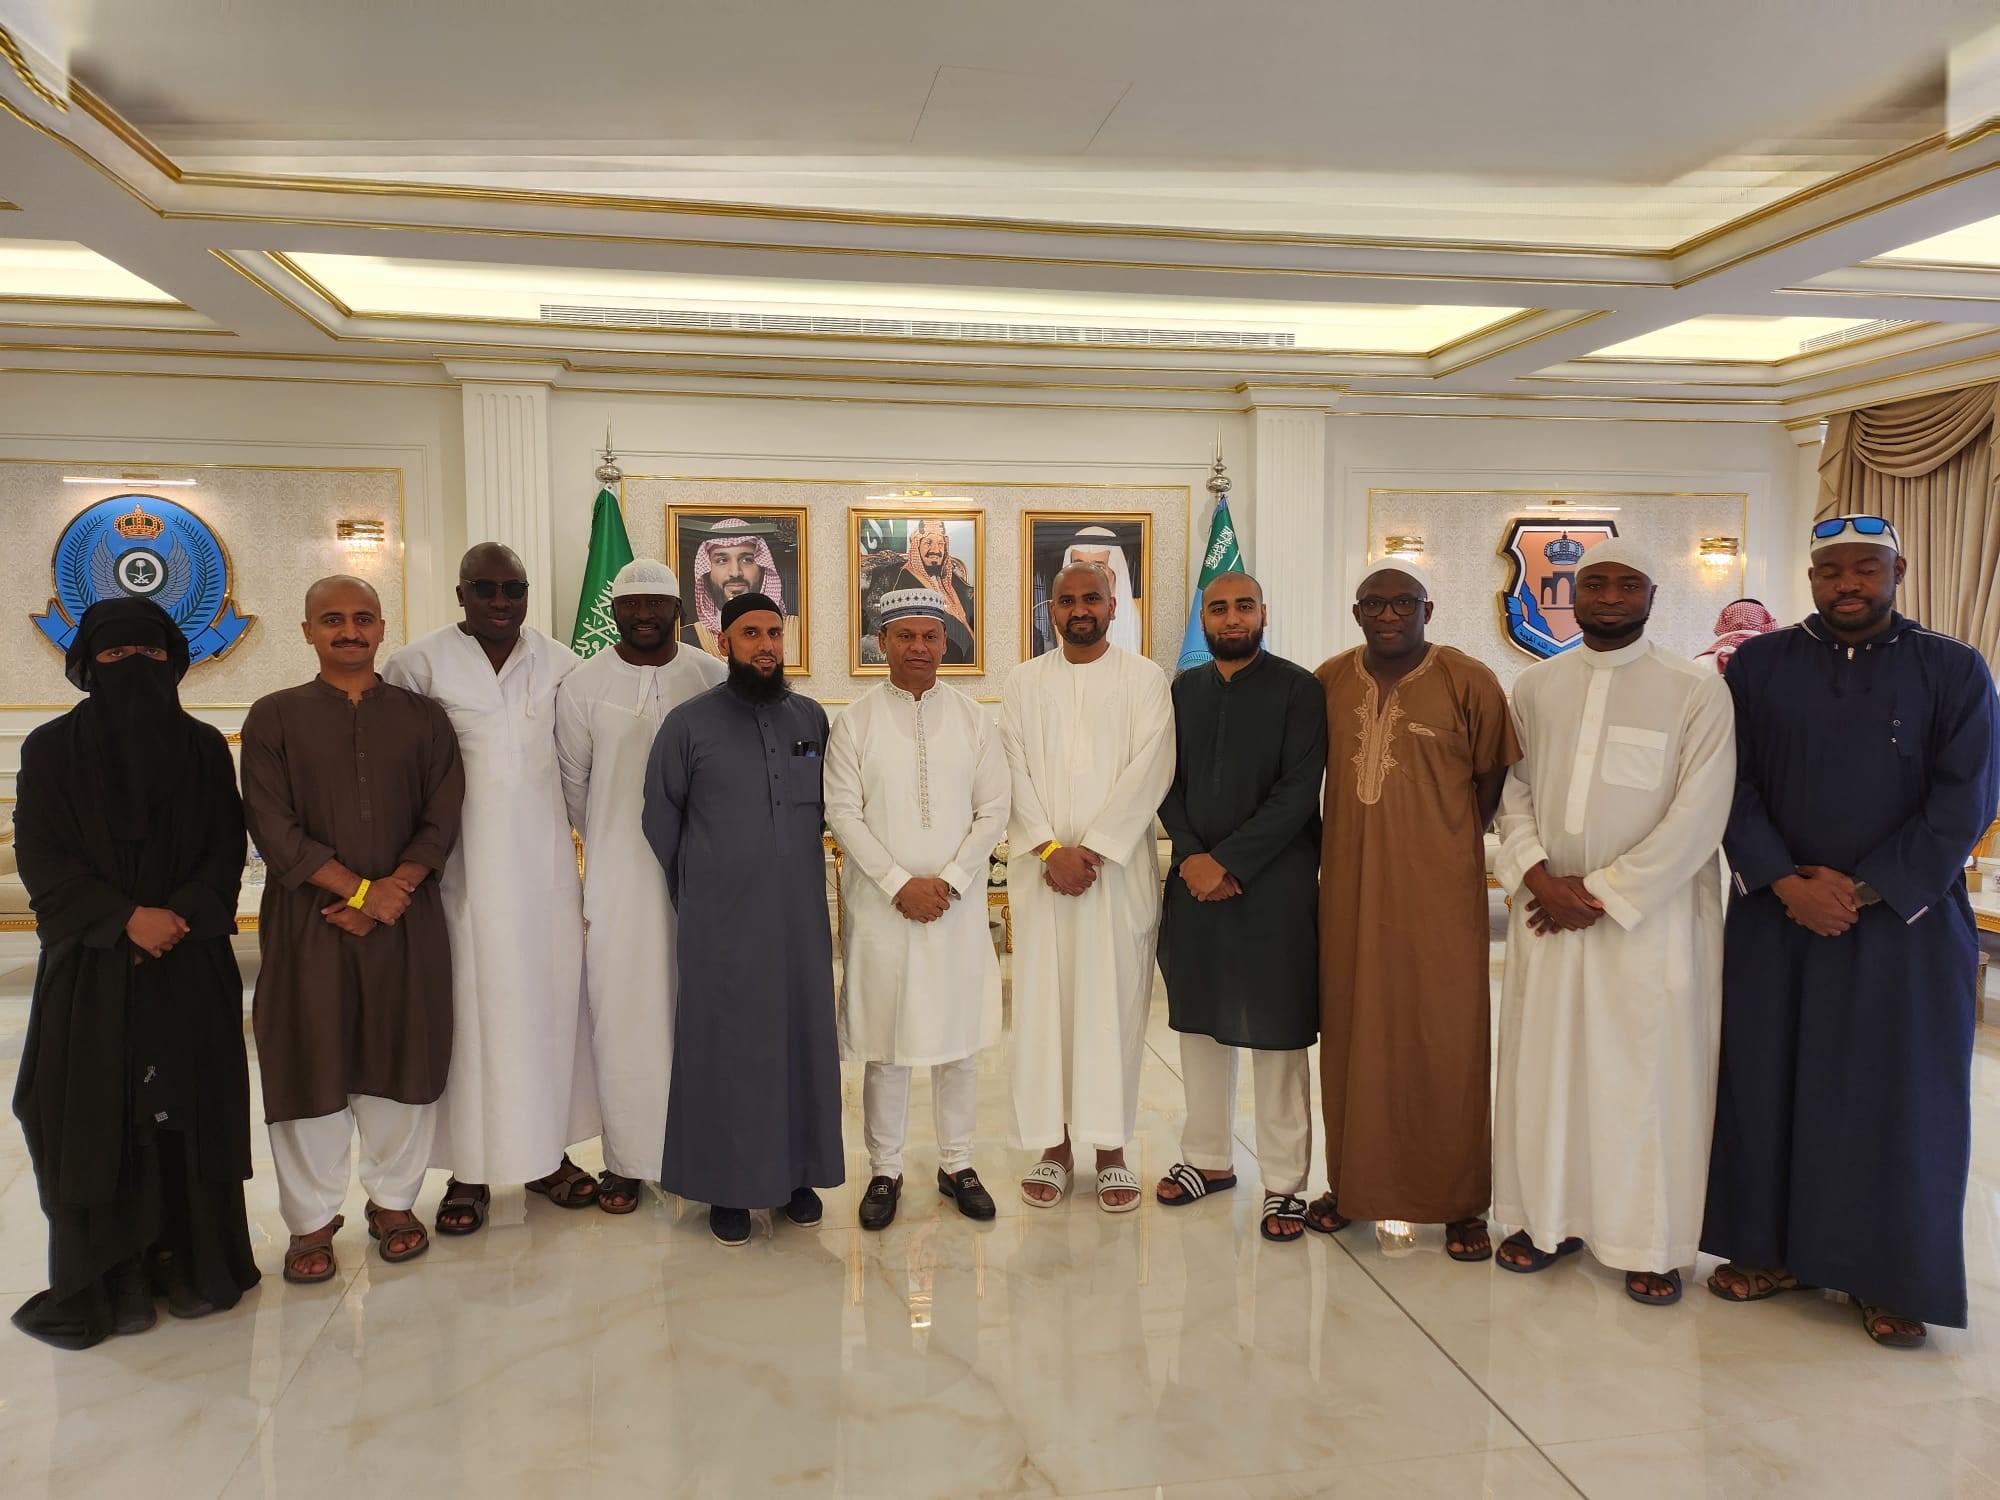 The delegation with Imam Asim Hafiz OBE and General Sheikh Mohammad Shafiuddin Ahmed